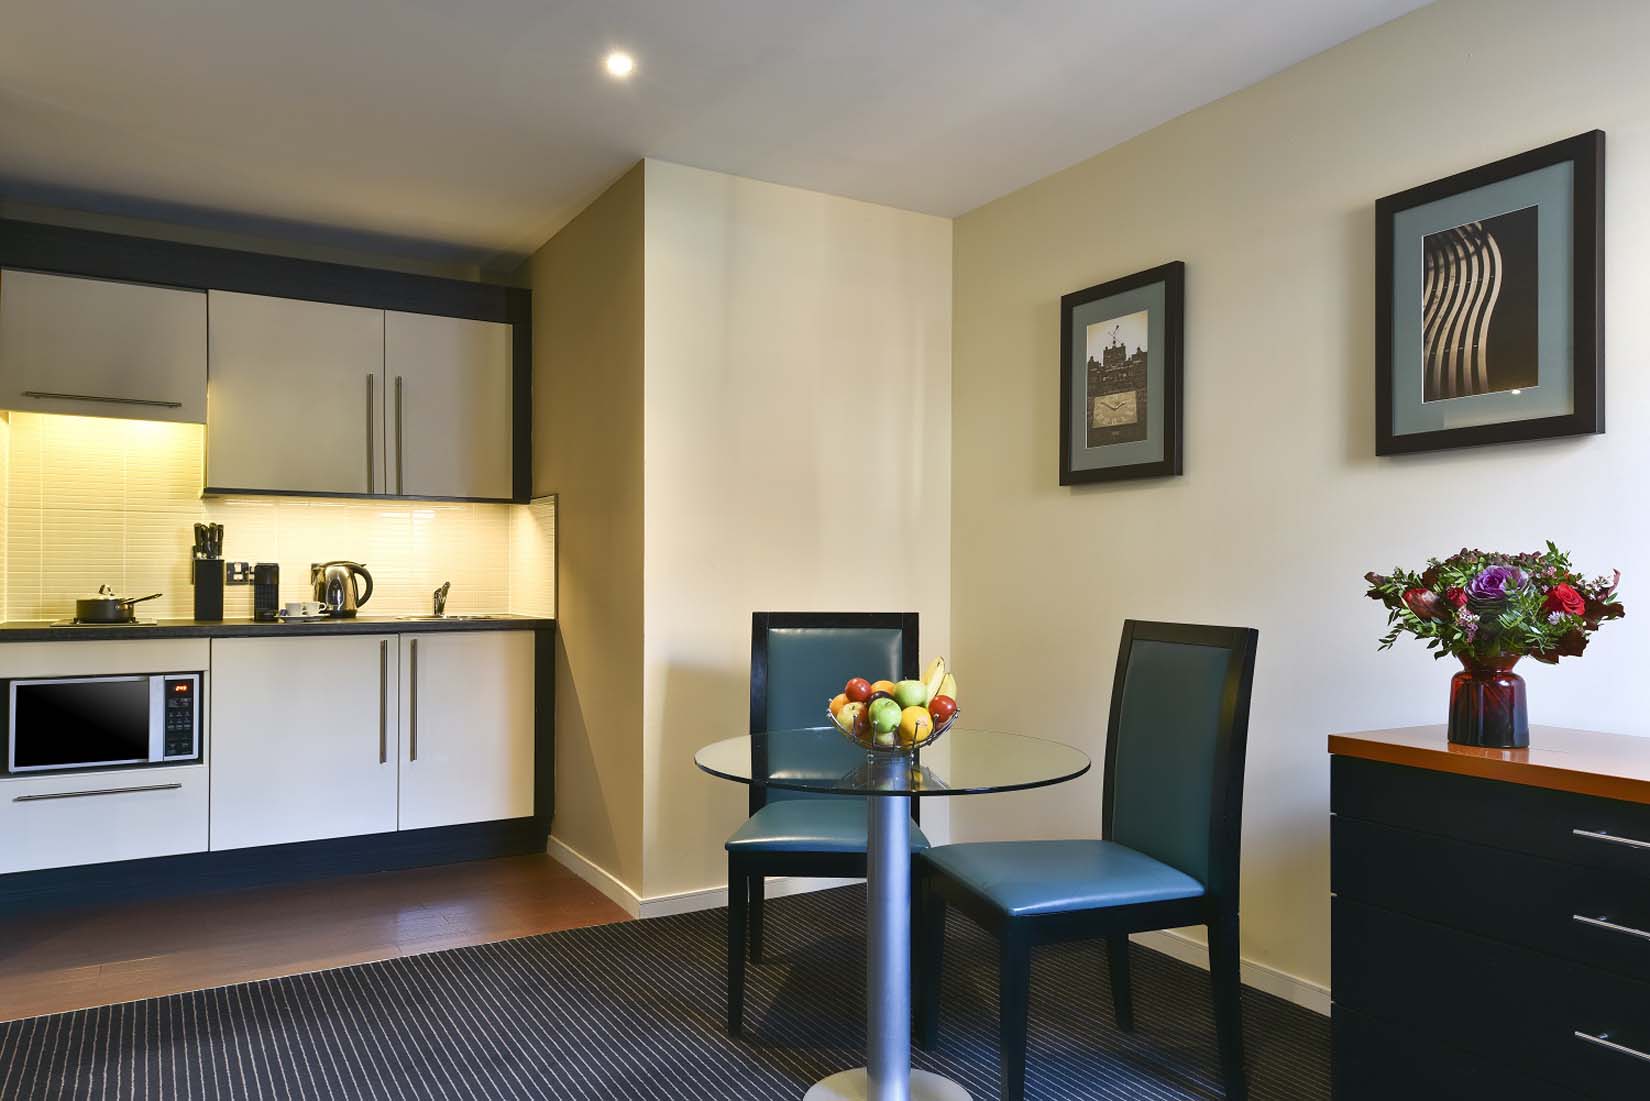 2 bedroom executive serviced apartments flat in Glasgow kitchen